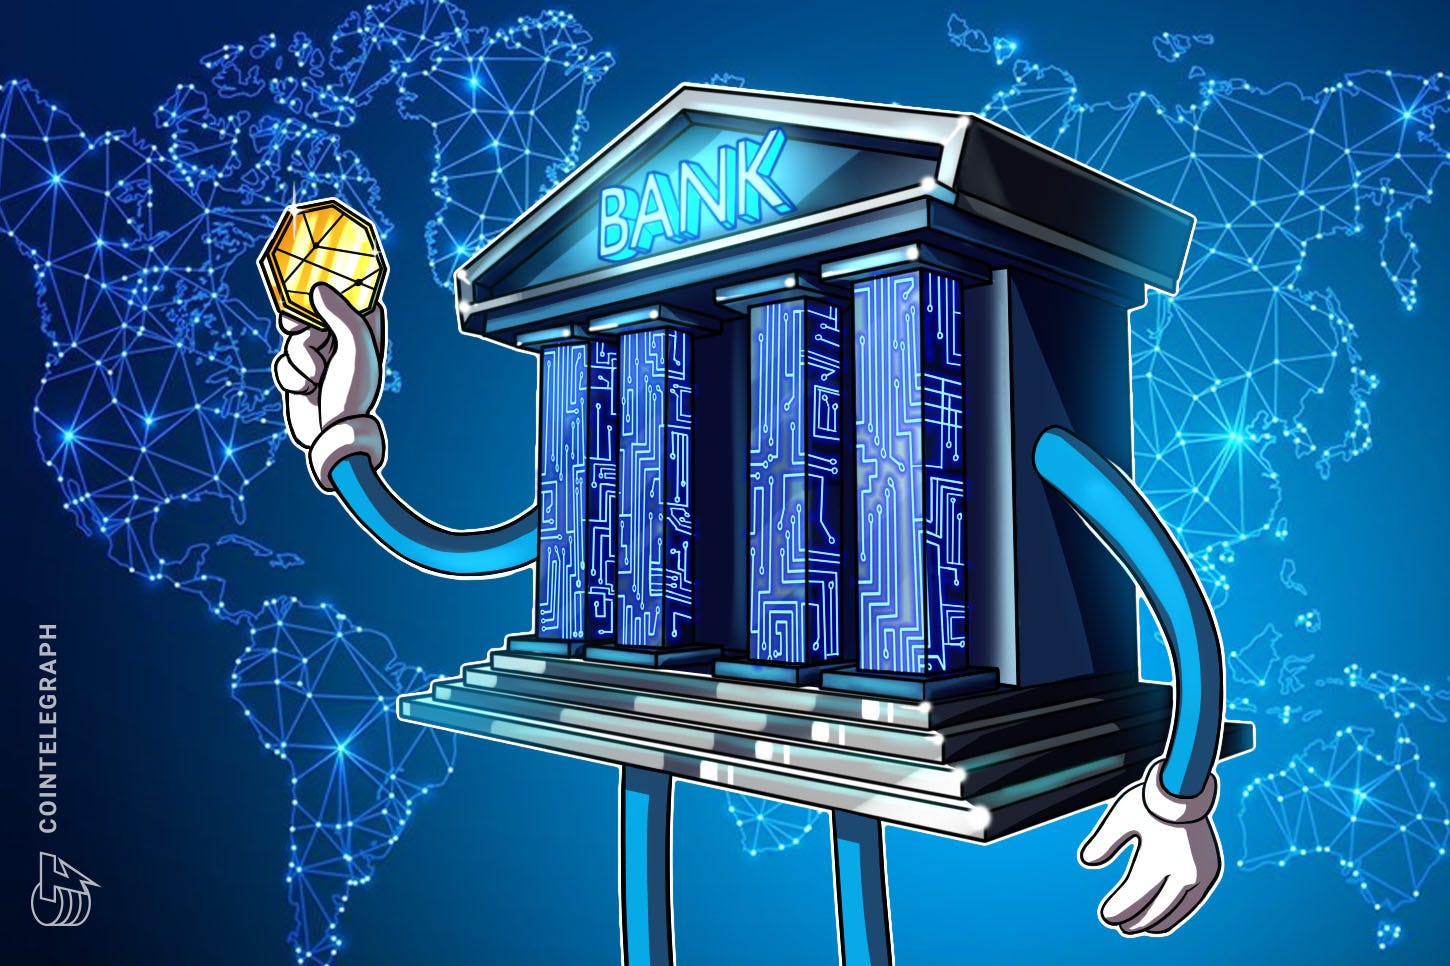 Former Barclays Exec to Launch UK's First Regulated Crypto Bank in 2020